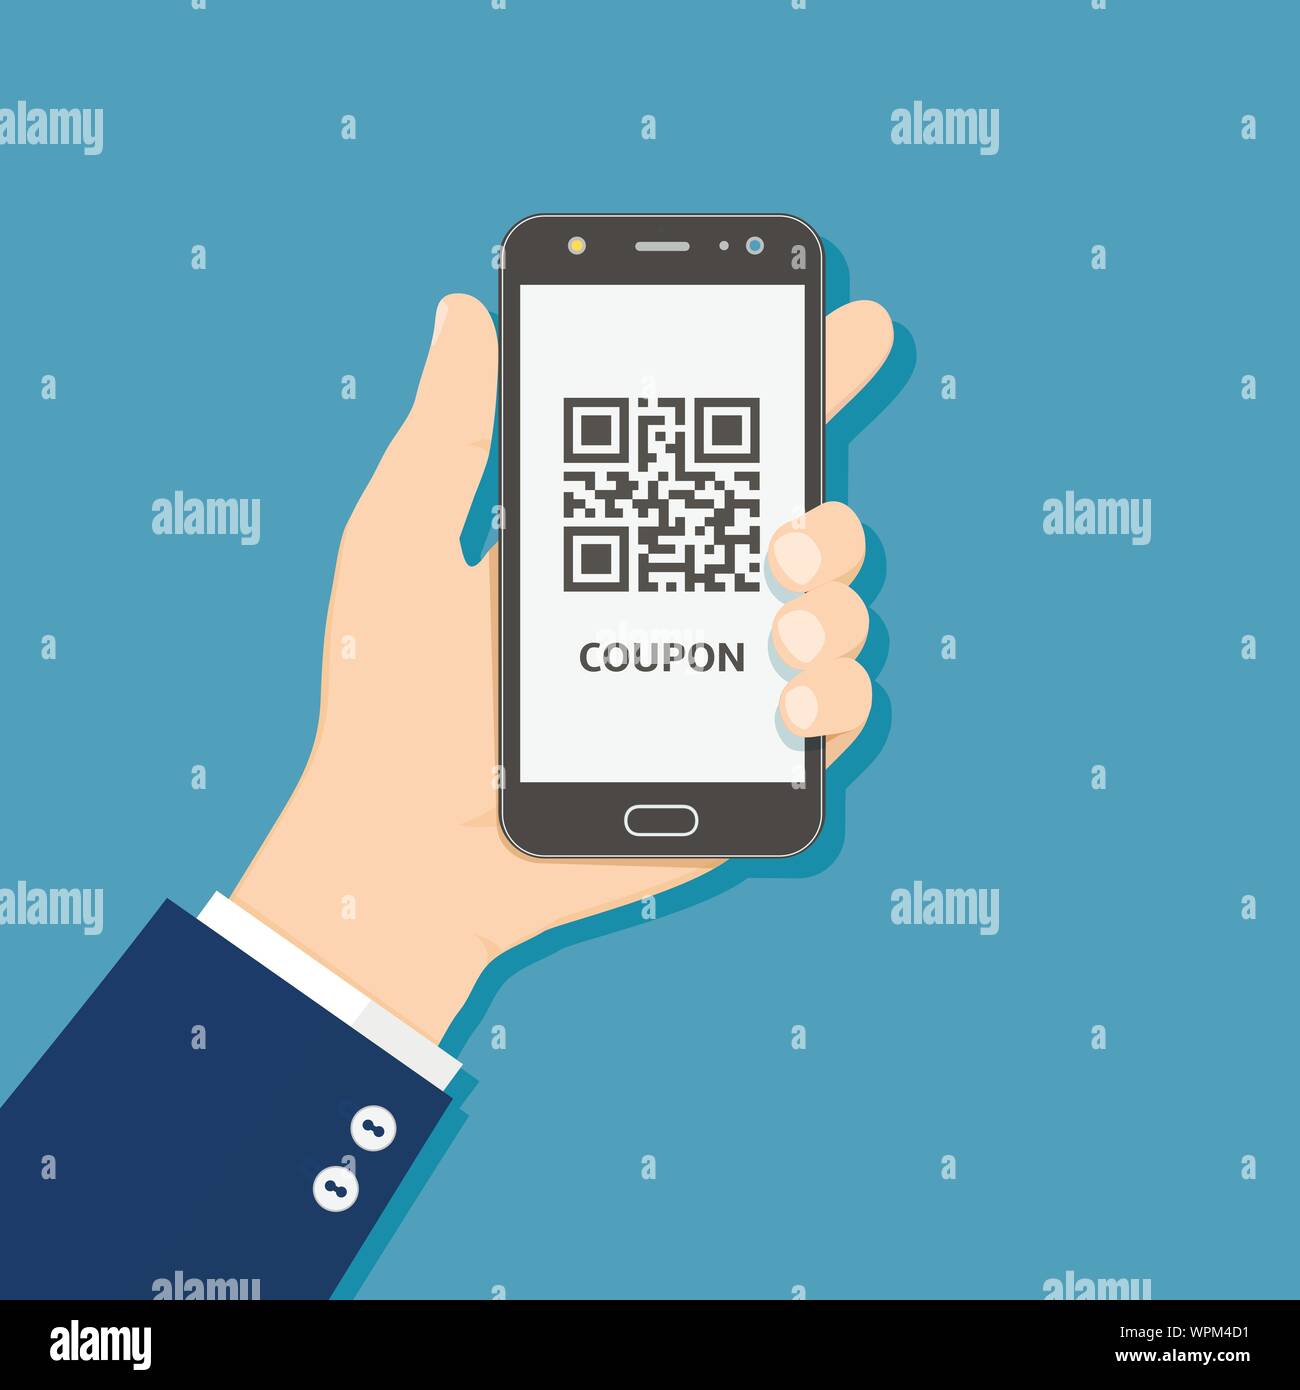 https://c8.alamy.com/comp/WPM4D1/hand-hold-smart-phone-with-coupon-qr-code-on-screen-flat-illustration-WPM4D1.jpg